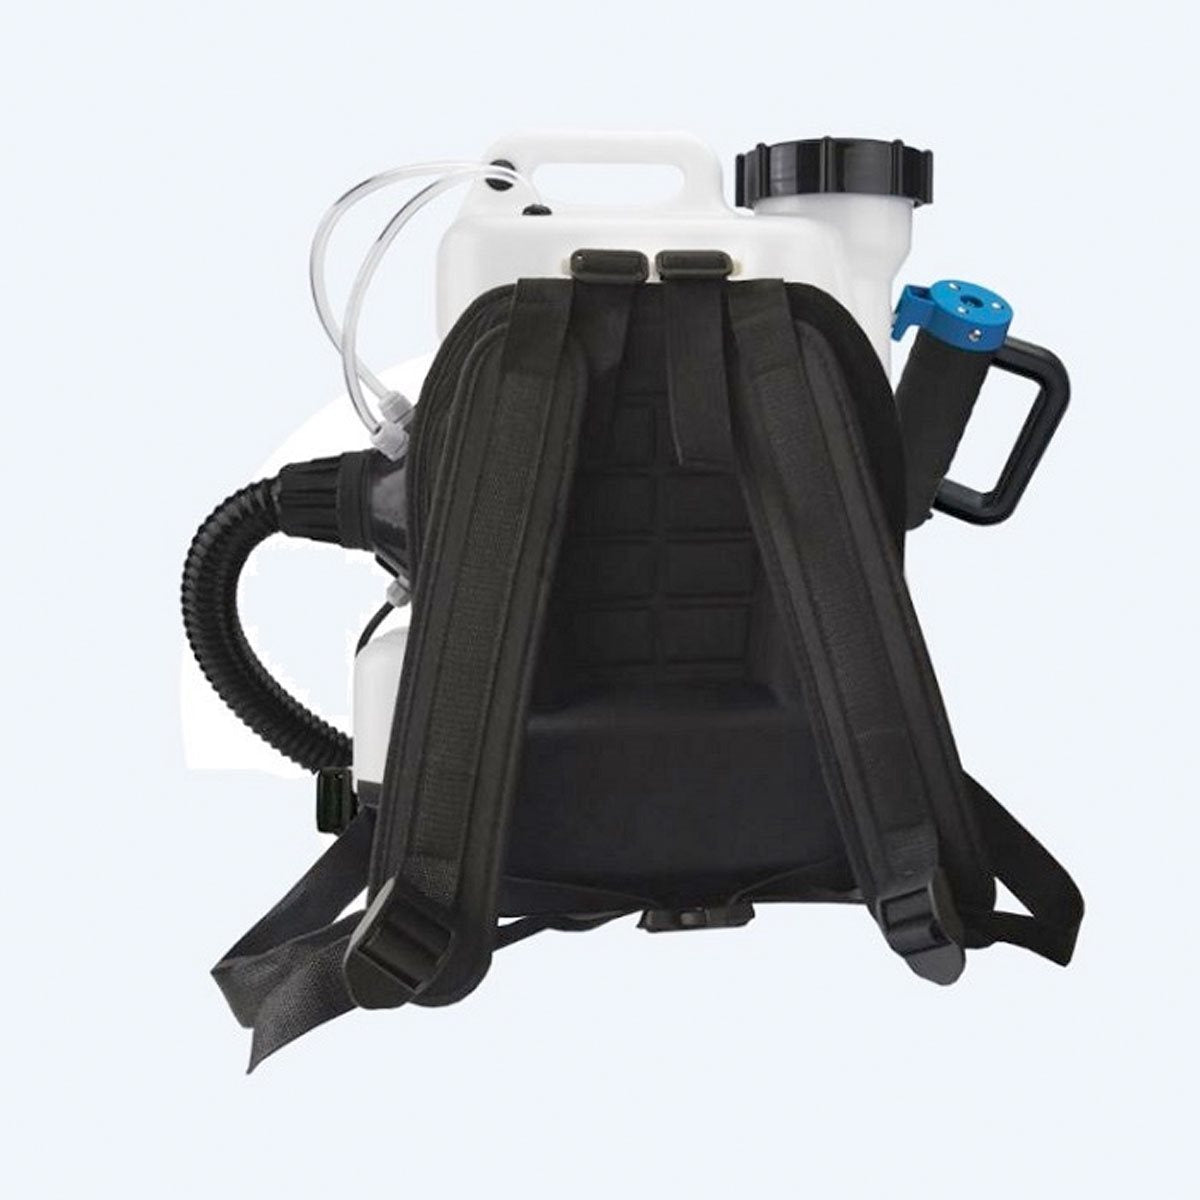 Product Secondary Image:Grow1 Electric Backpack Fogger ULV Atomizer 4 Gallon